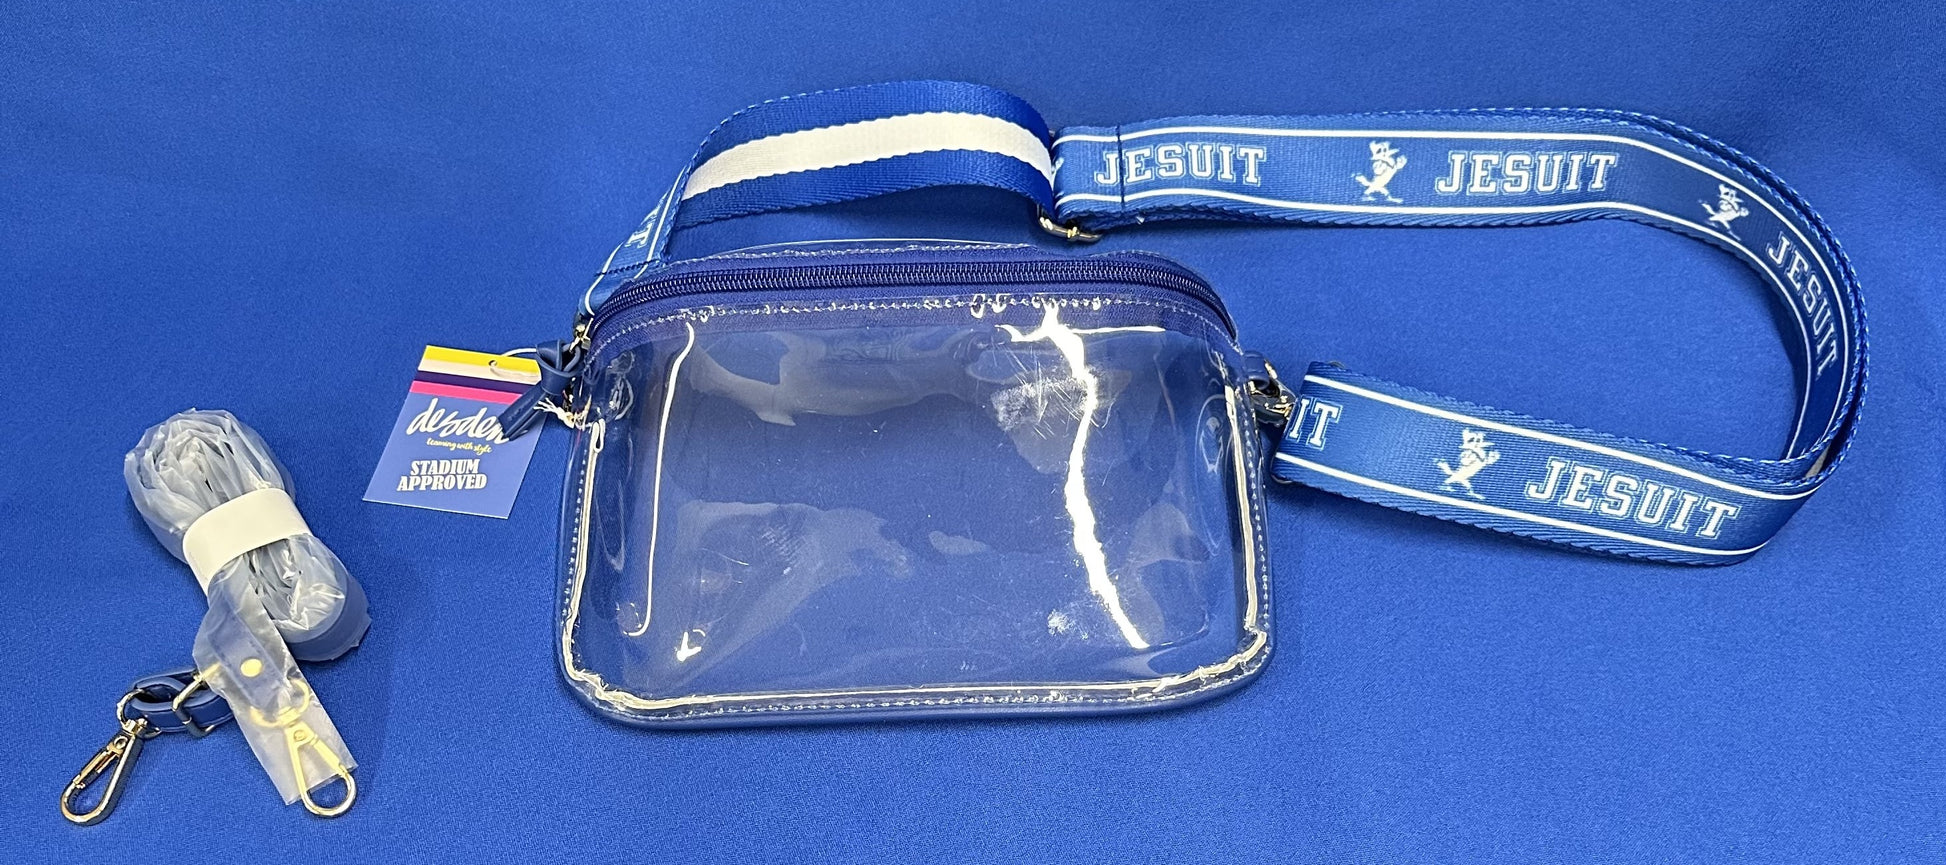 Desden.  9.25"/6"/2.5" dimensions.  Stadium approved.  Clear Plastic Bag - "Sling Style" with Jesuit 1.5" purse straps.  Clear bag with vegan leather trim, zipper closure and removable straps.  Comes with 2 sets of adjustable purse straps, one in matching vegan leather, a 2nd one is Royal Blue/White stripe on one side with JESUIT and Jayson logo on the other.